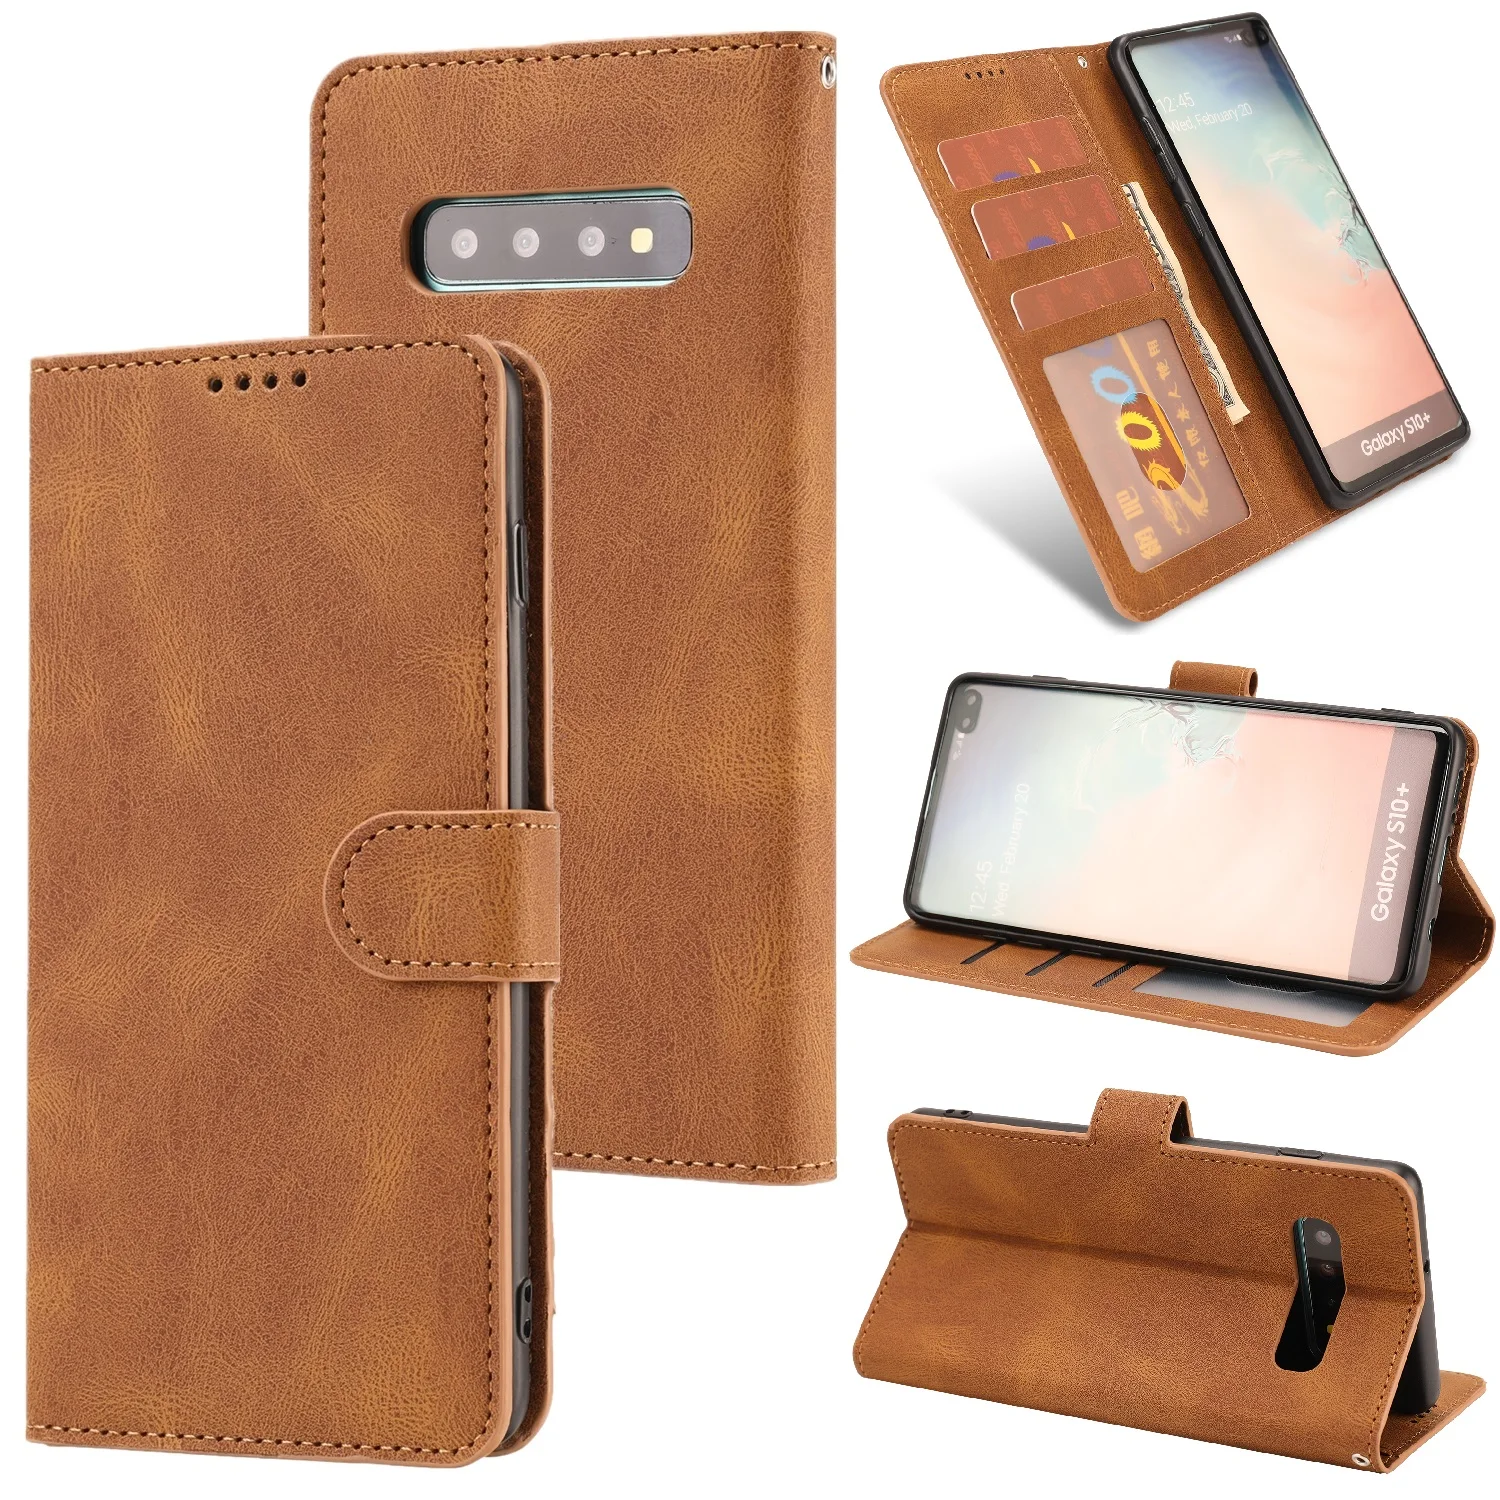 

Leather Wallet Phone Case For Samsung galaxy S10 s10plus S10E S9 s9plus s8 S8plus s7 s7edge Flip Card Slot Phone Case Cover